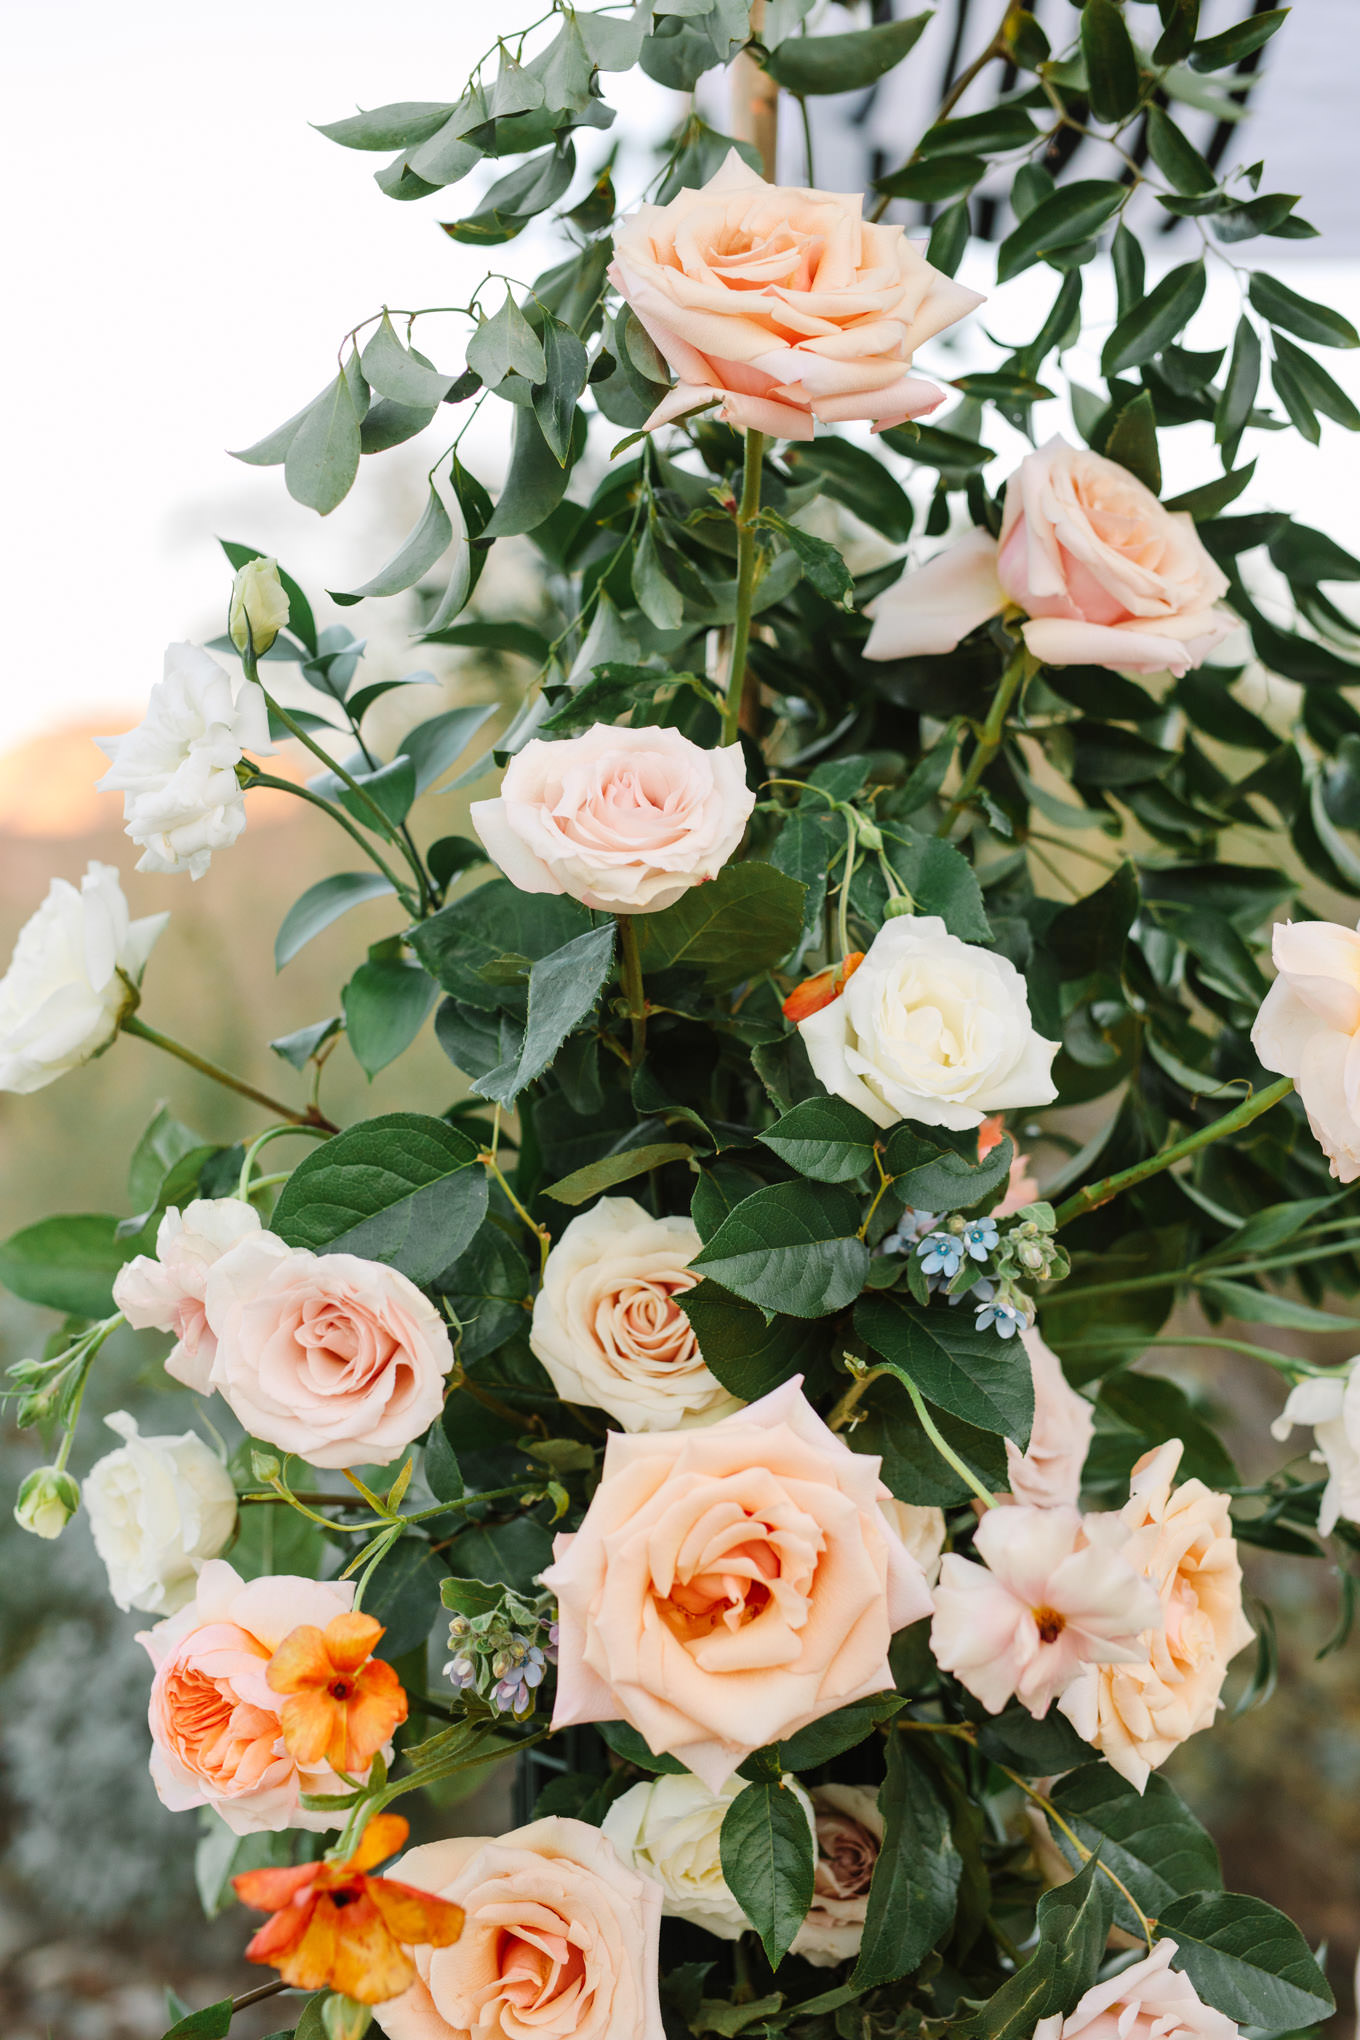 Floral detail at wedding ceremony | Living Desert Zoo & Gardens wedding with unique details | Elevated and colorful wedding photography for fun-loving couples in Southern California |  #PalmSprings #palmspringsphotographer #gardenwedding #palmspringswedding  Source: Mary Costa Photography | Los Angeles wedding photographer 